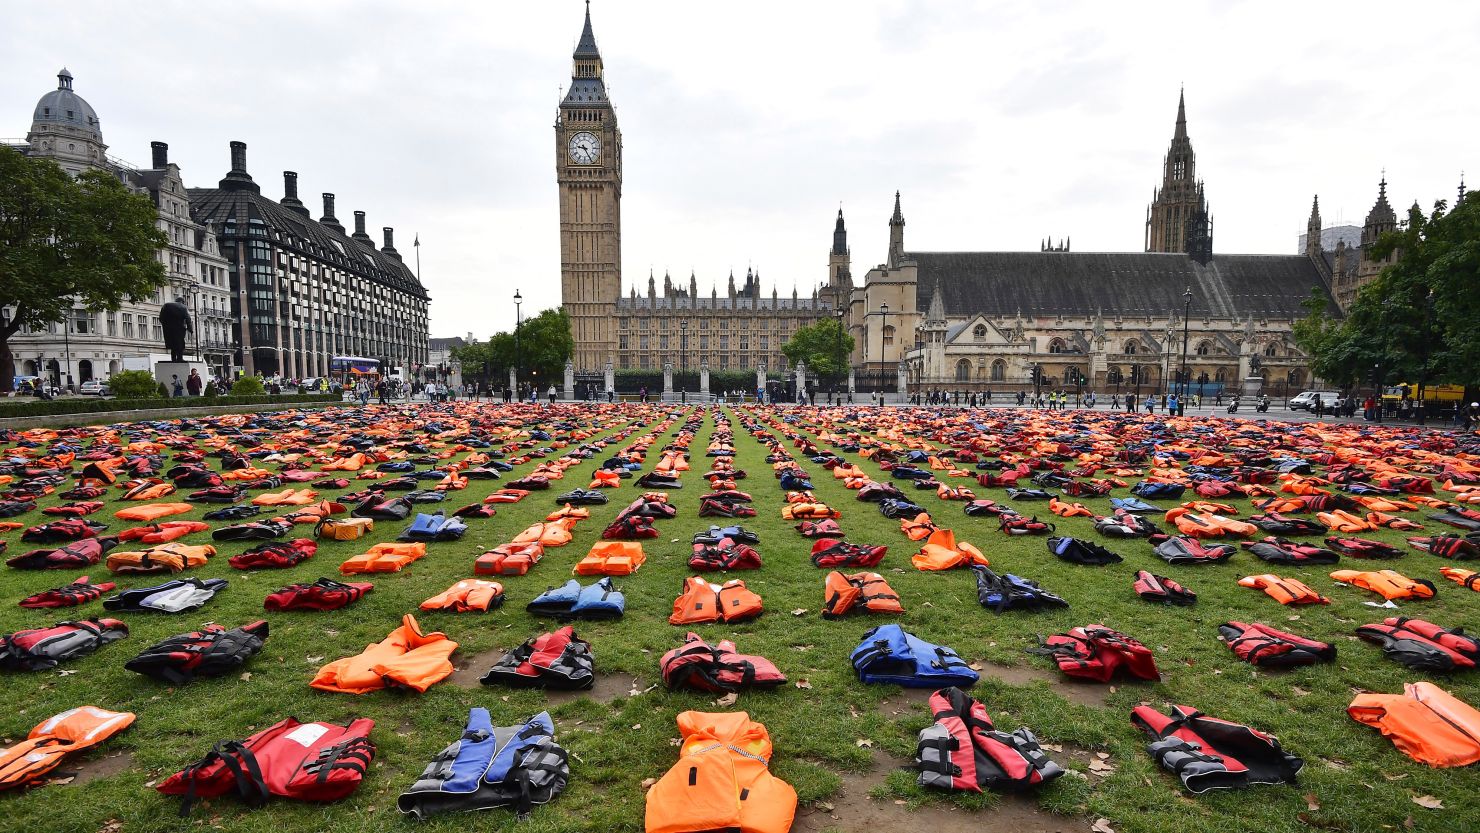 The jackets represent the thousands of refugees who have died trying to reach Europe since 2015. 